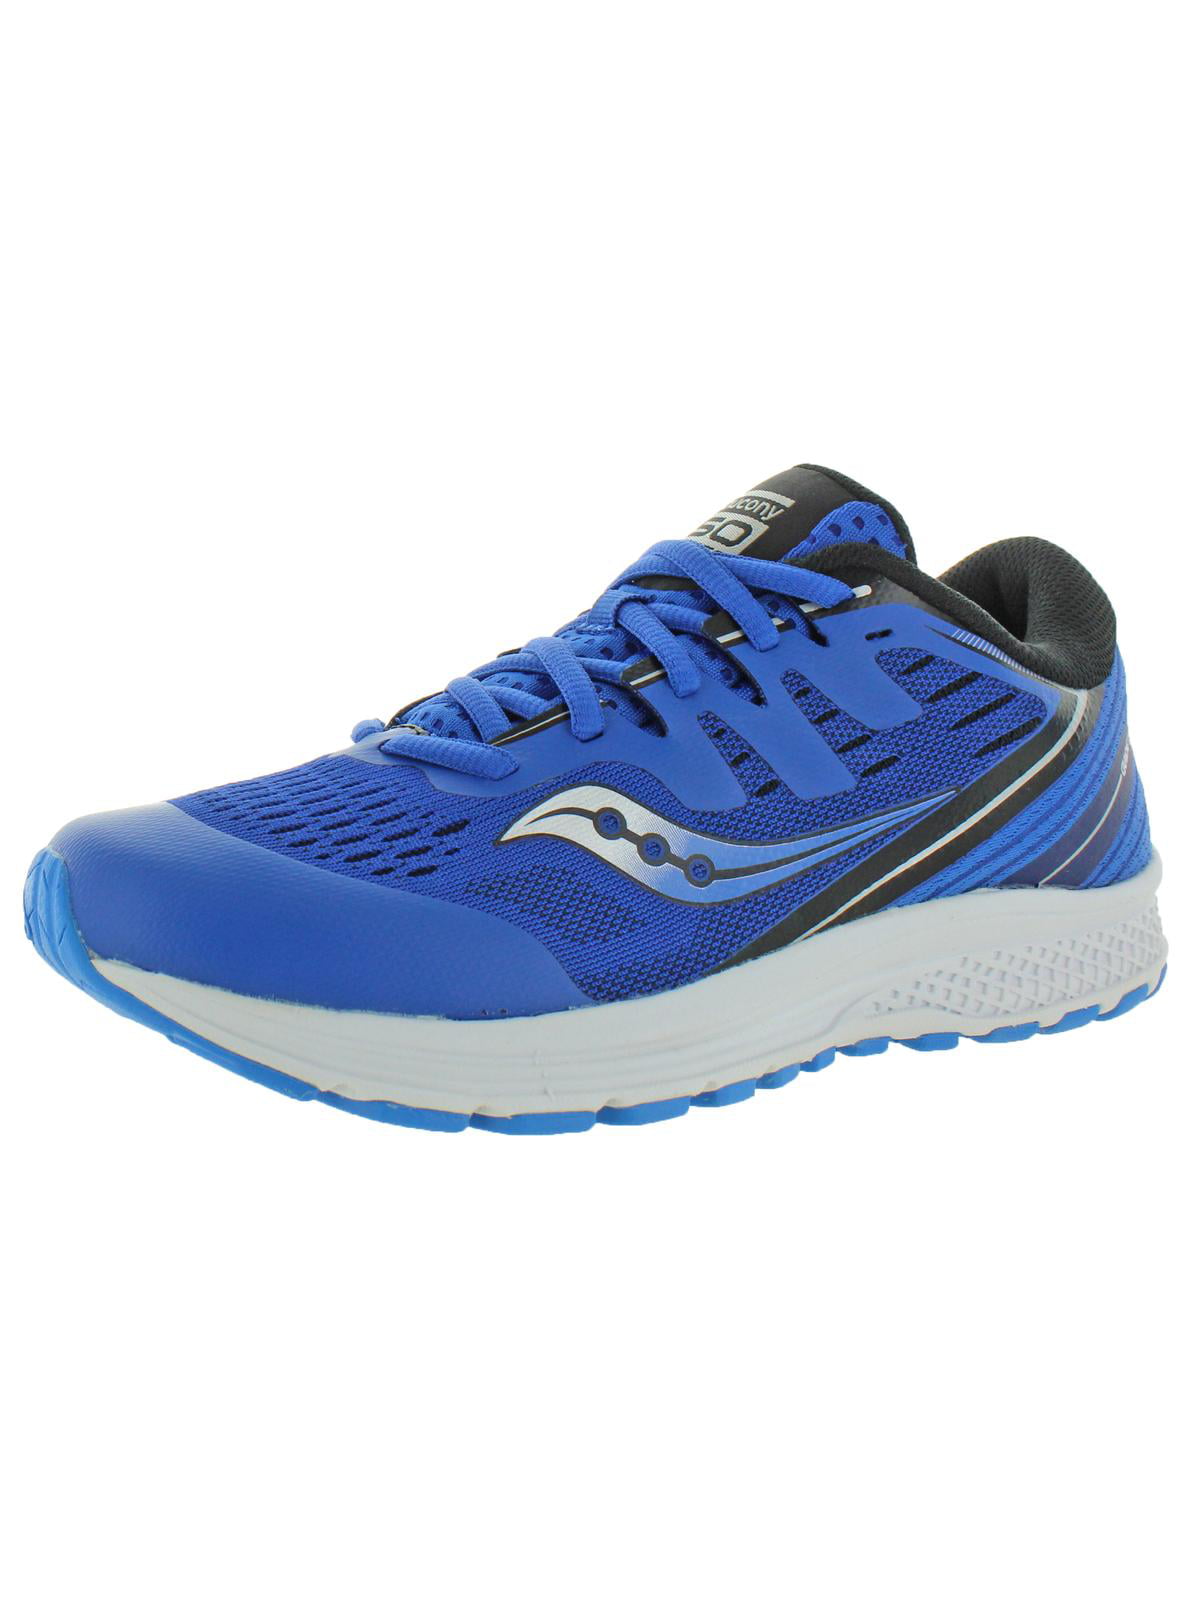 Saucony Boys Guide ISO 2 Performance Lace Up Running Shoes - Walmart.com